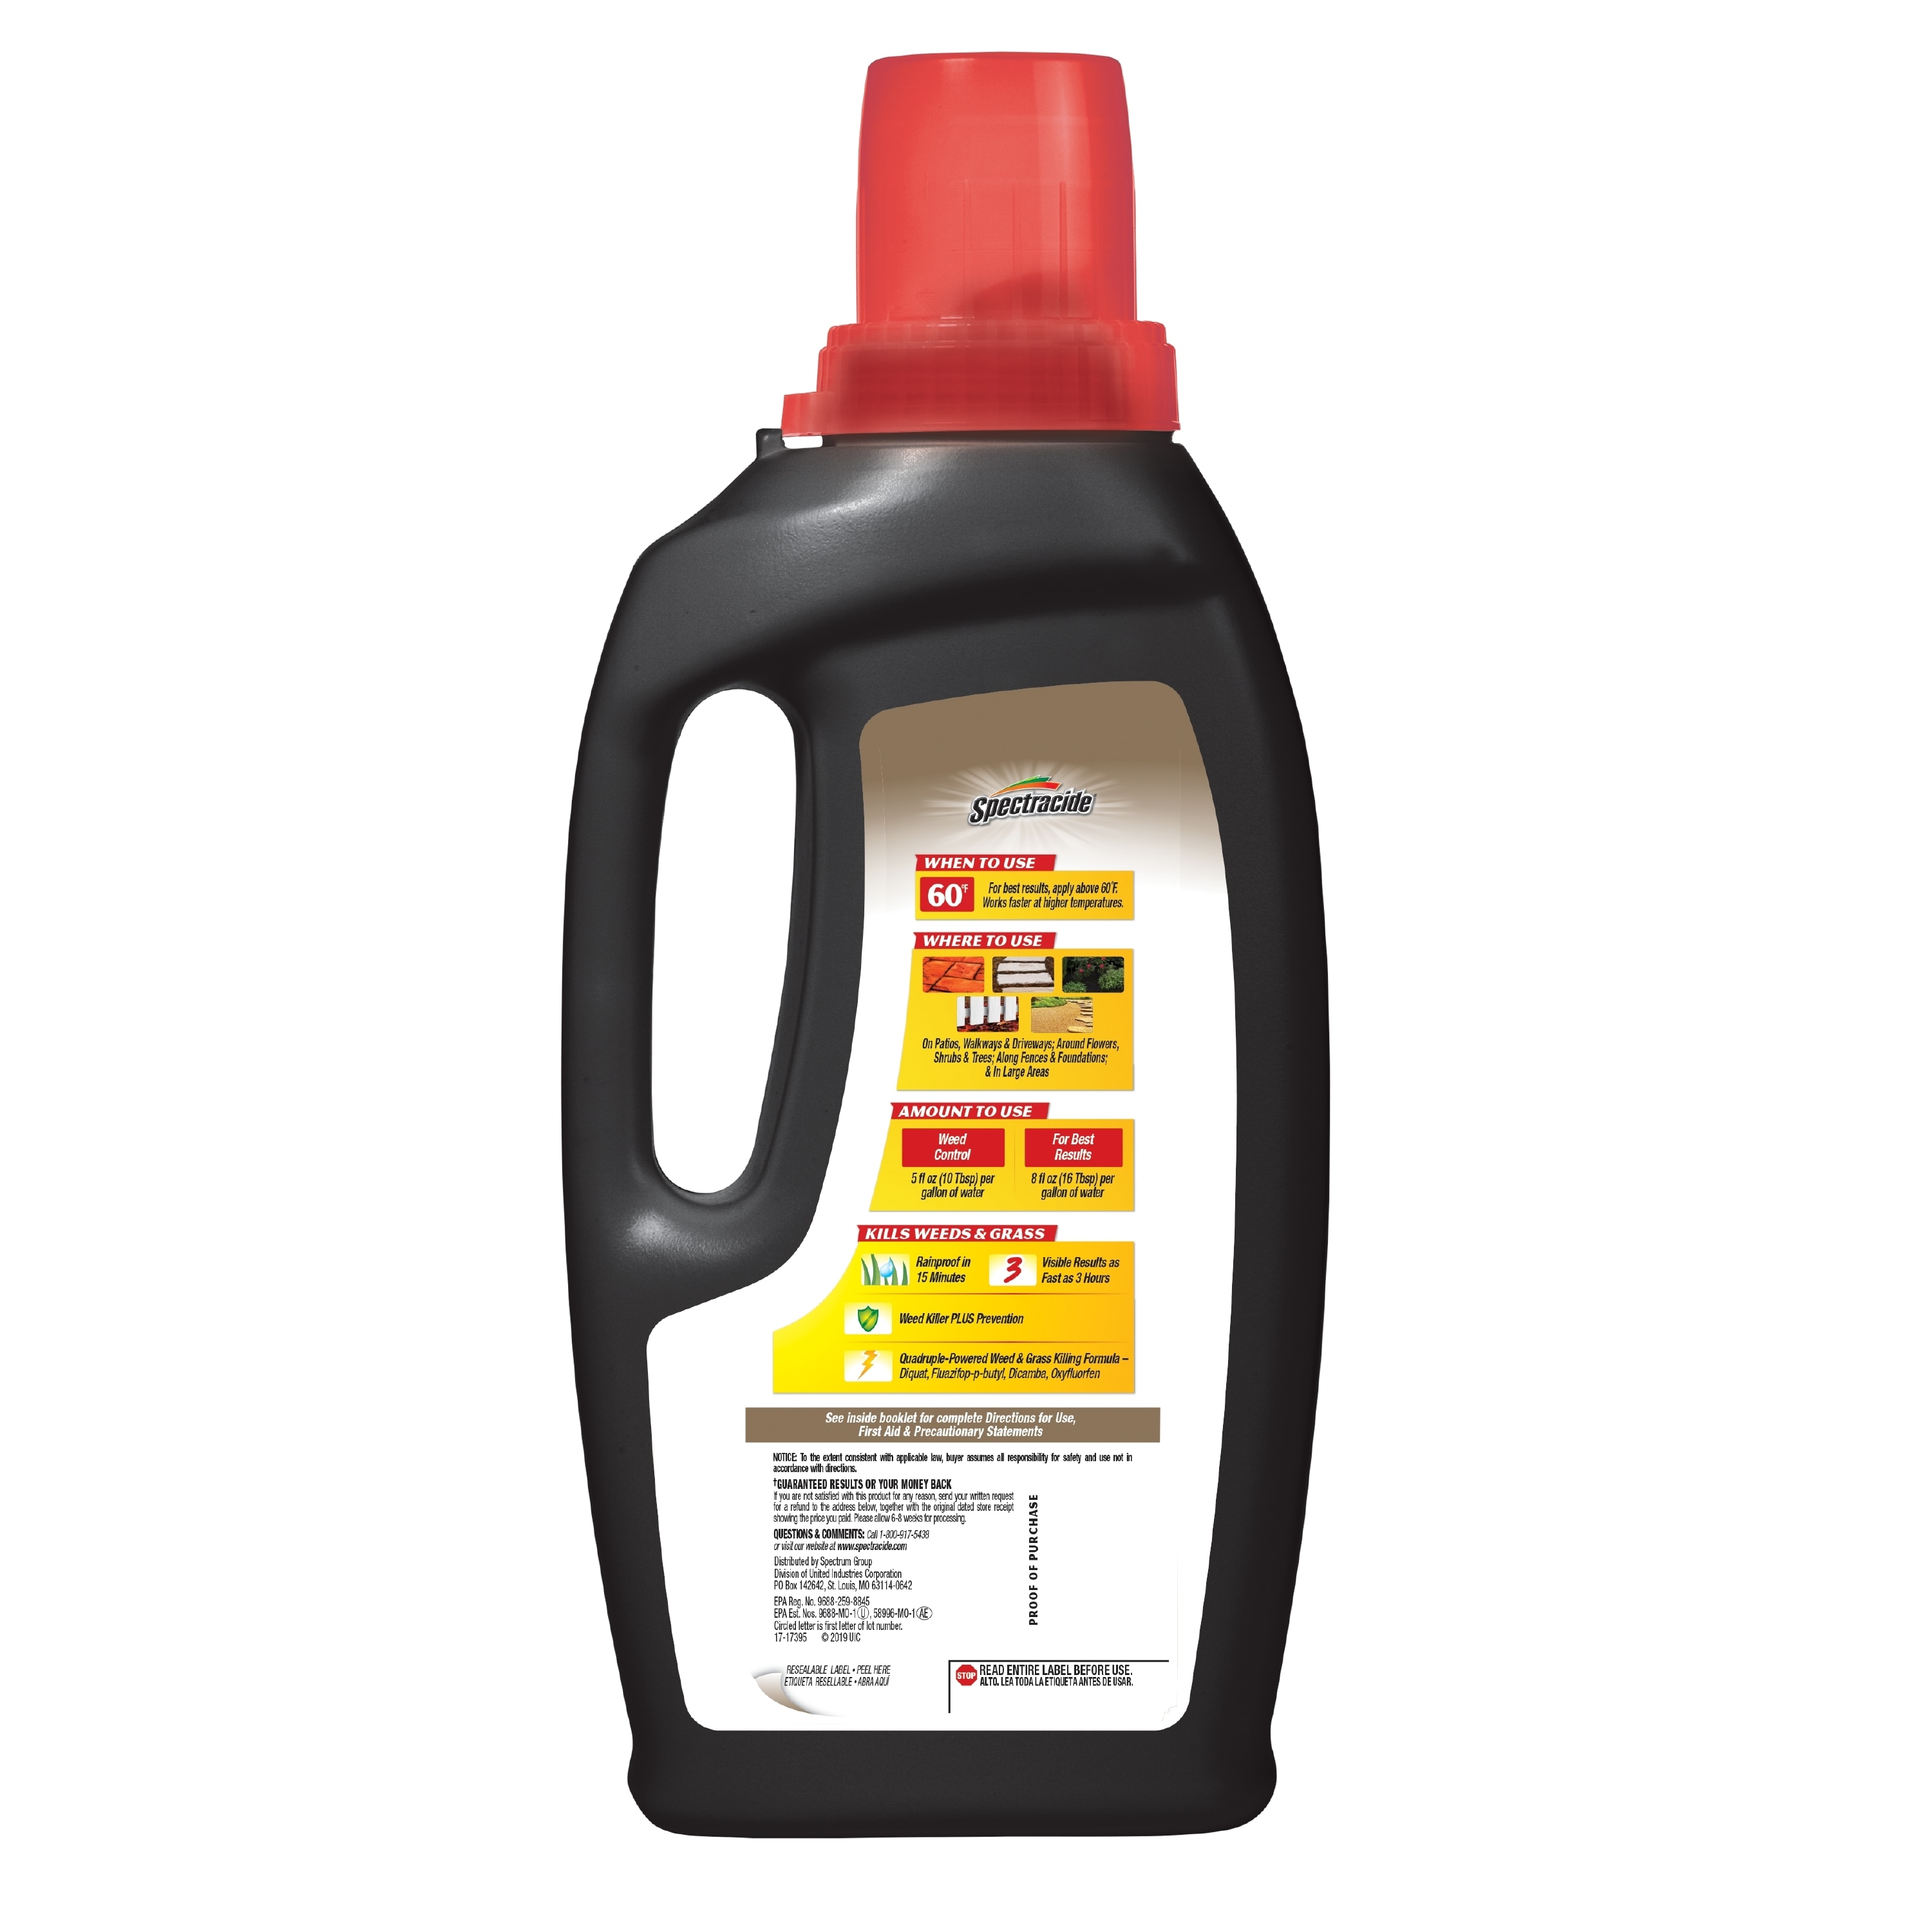 Spectracide Extended Control 32 Fl Oz Concentrated Weed And Grass Killer In The Weed Killers